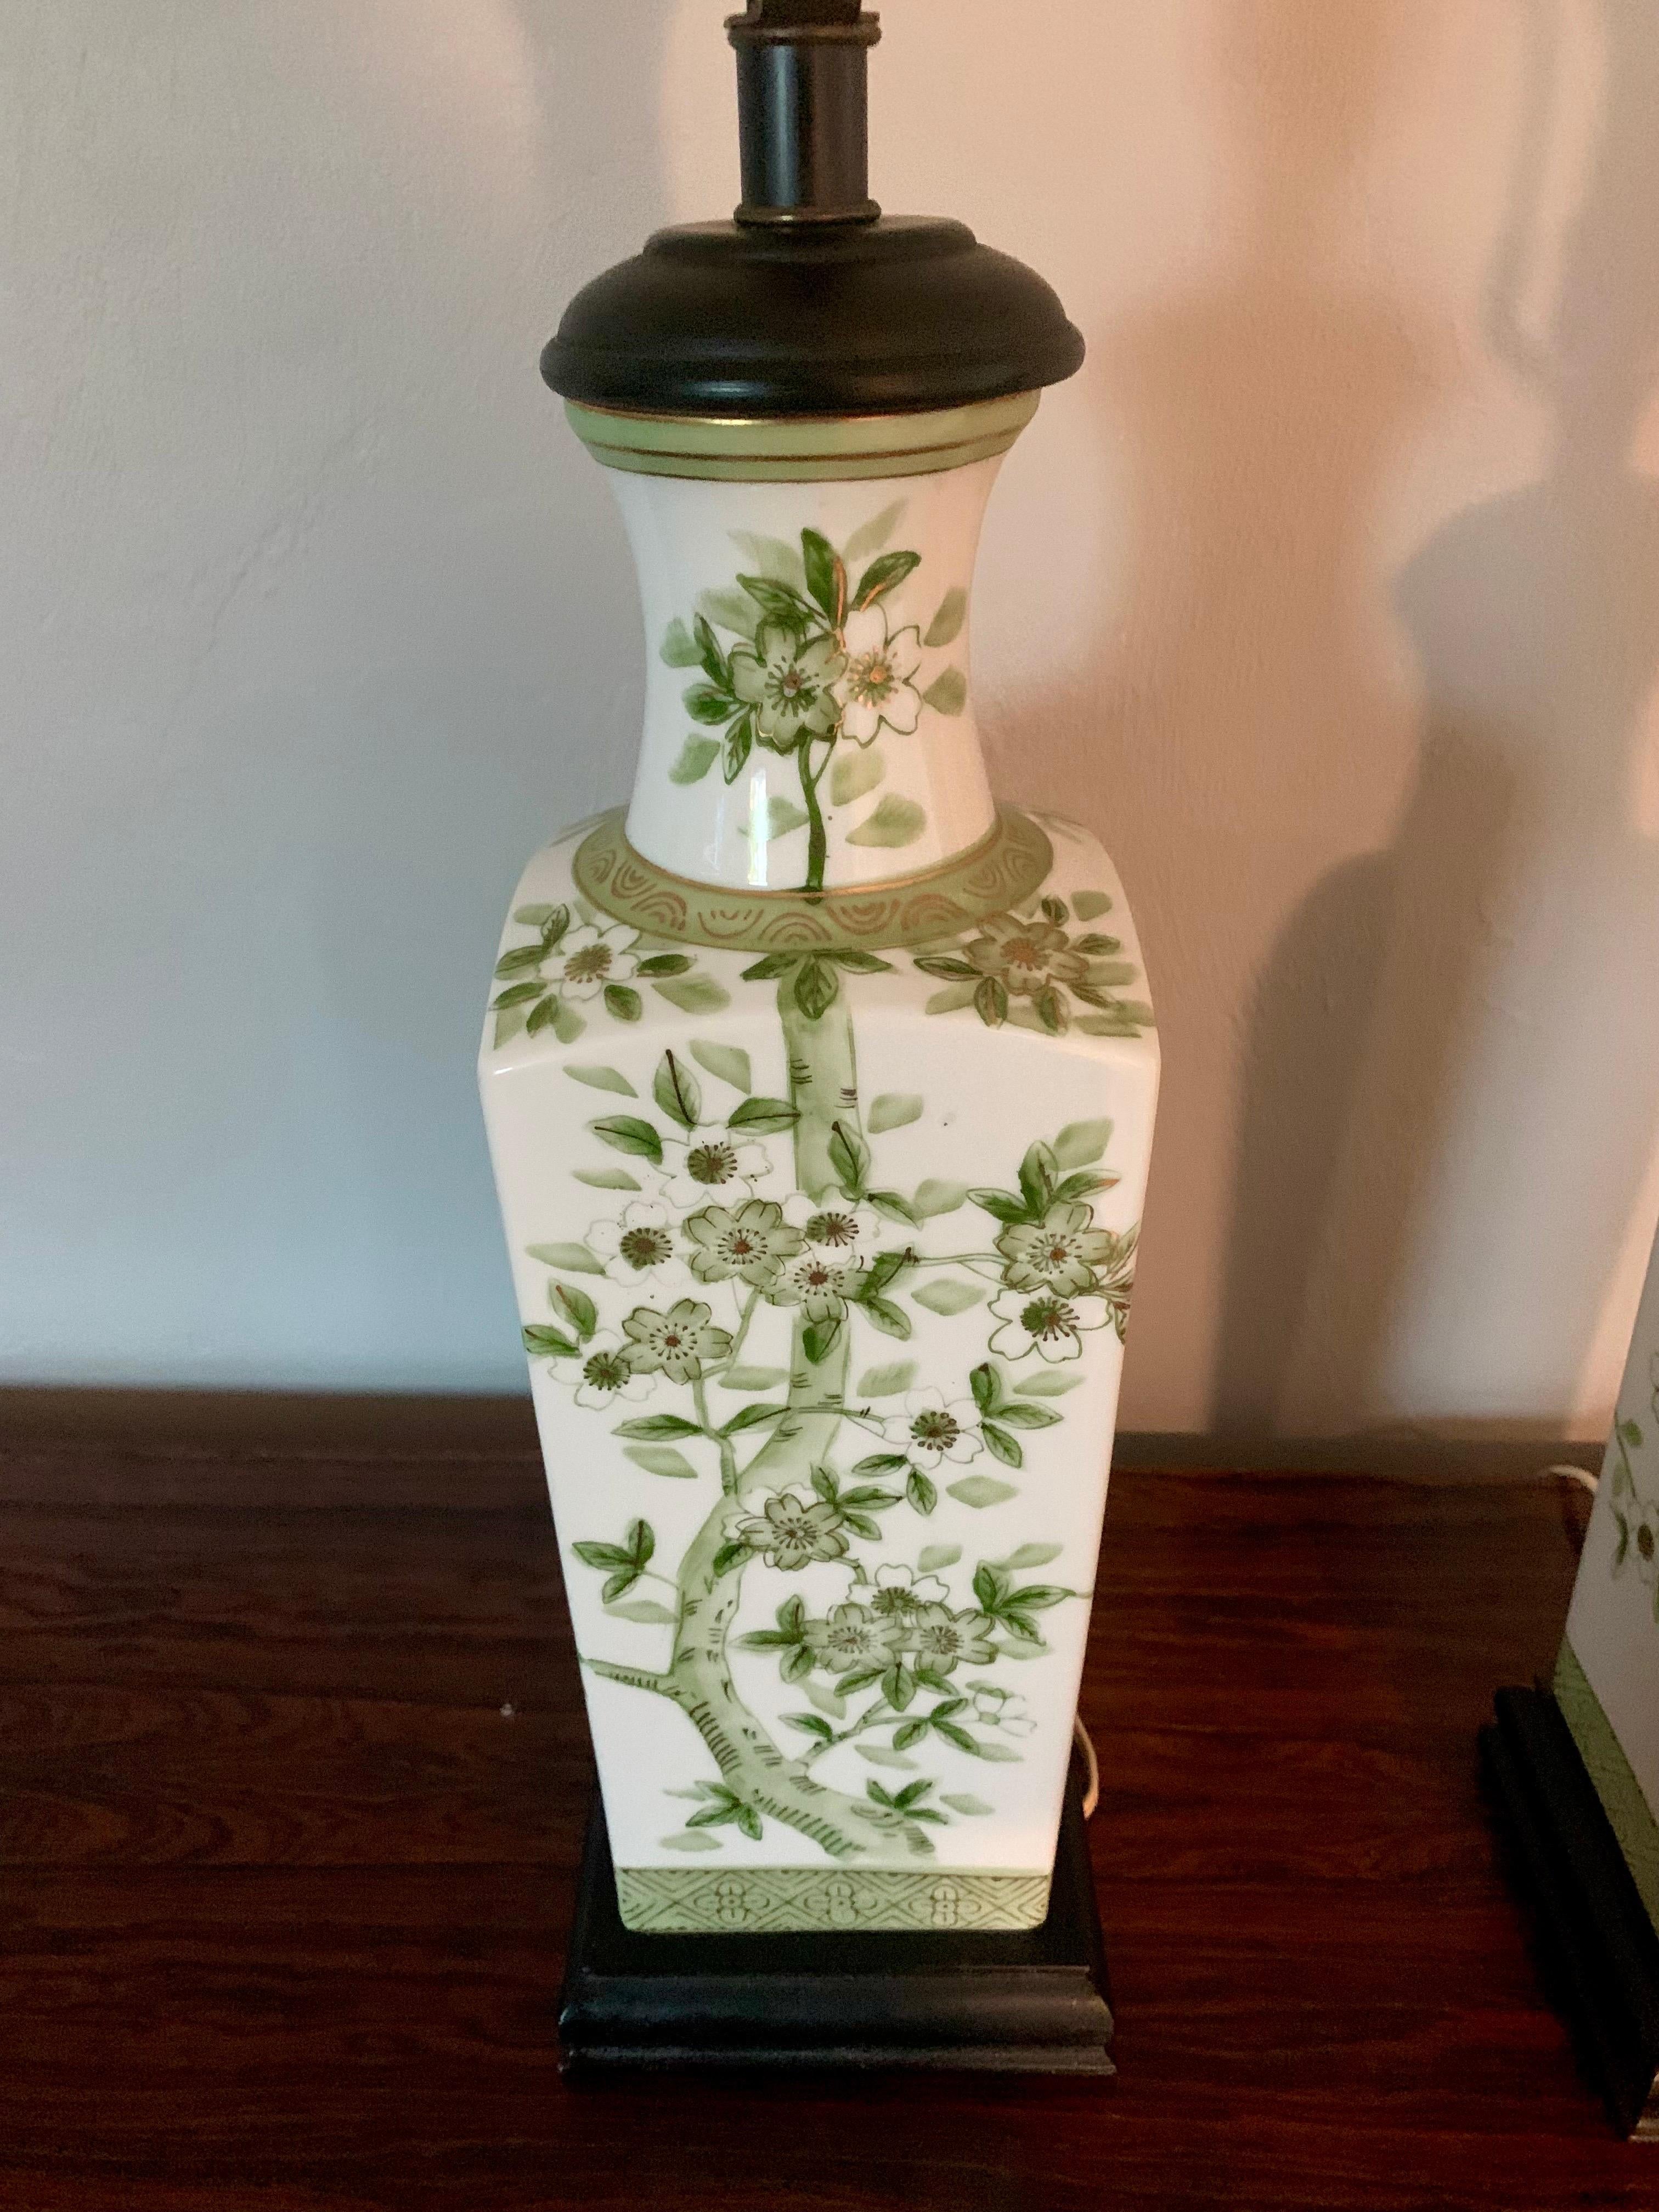 Pair of Japanese Hand Painted Porcelain Lamps In Good Condition For Sale In Boynton Beach, FL